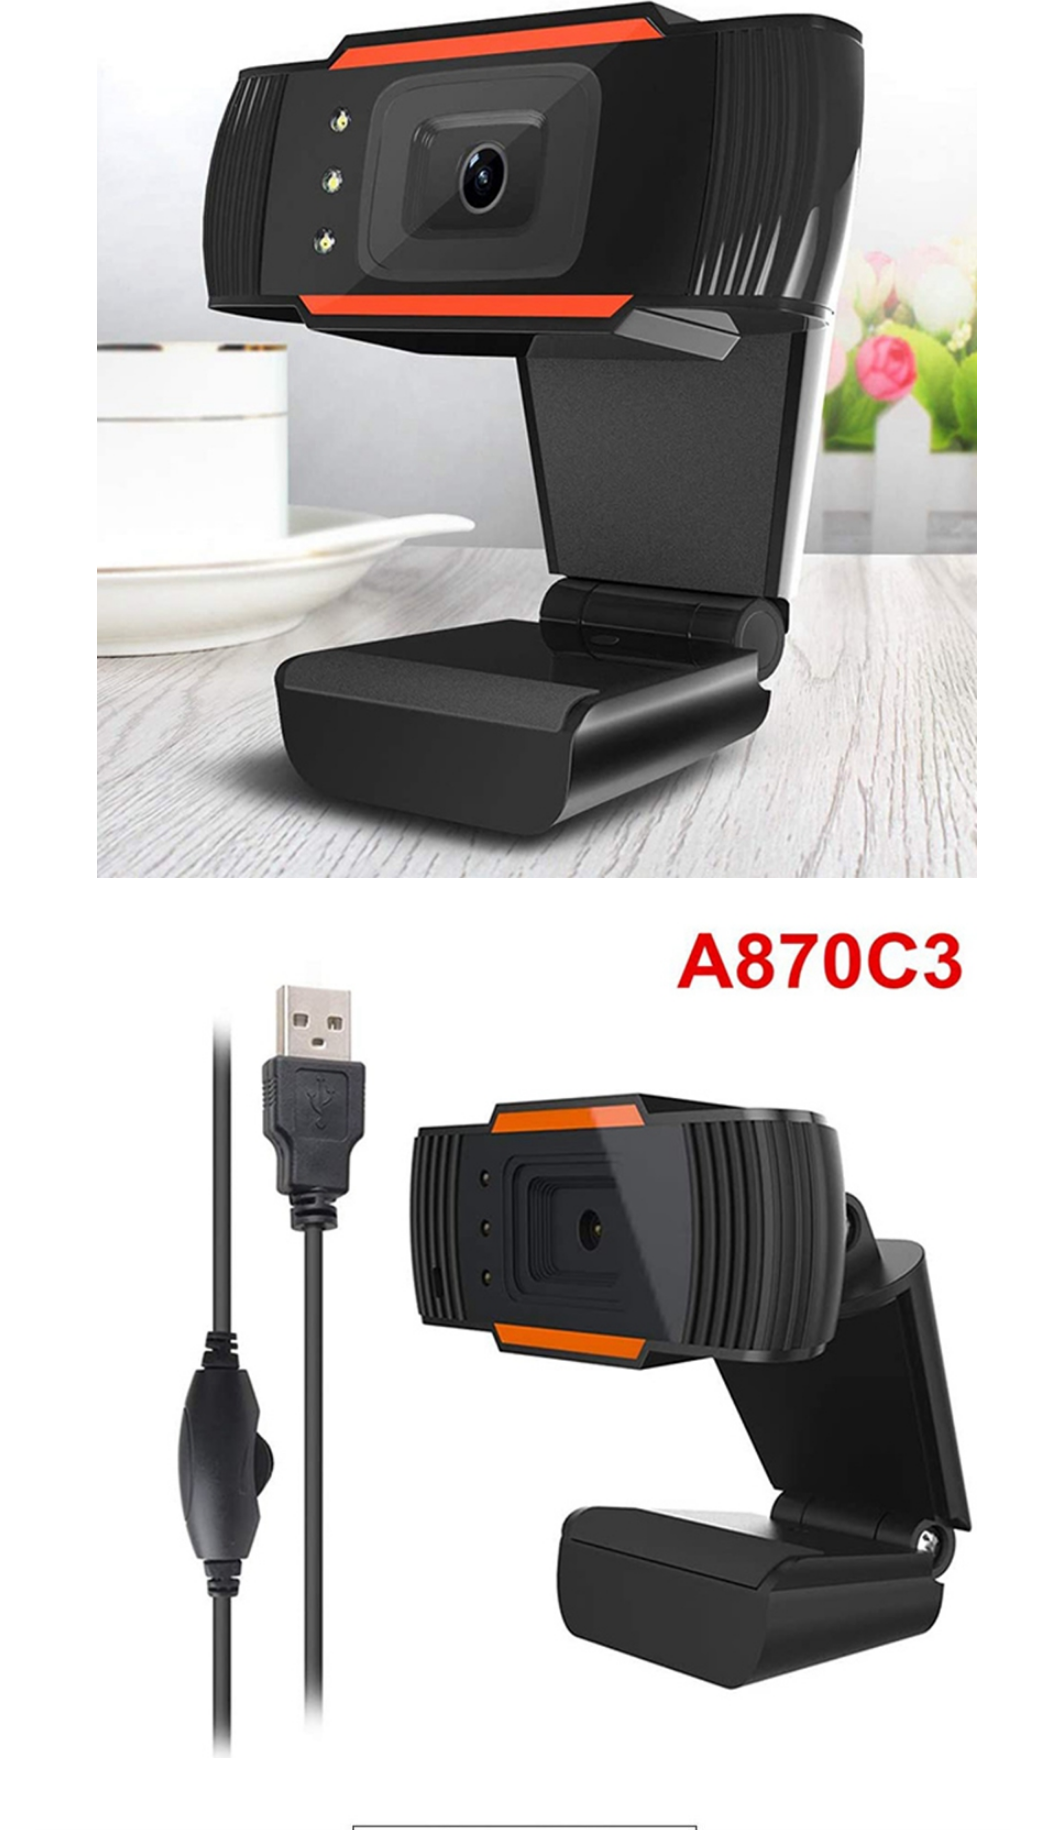 480P USB2.0 Webcam Camera with Mic Night Vision Web Cam For PC Laptop Web  Ca-YN 